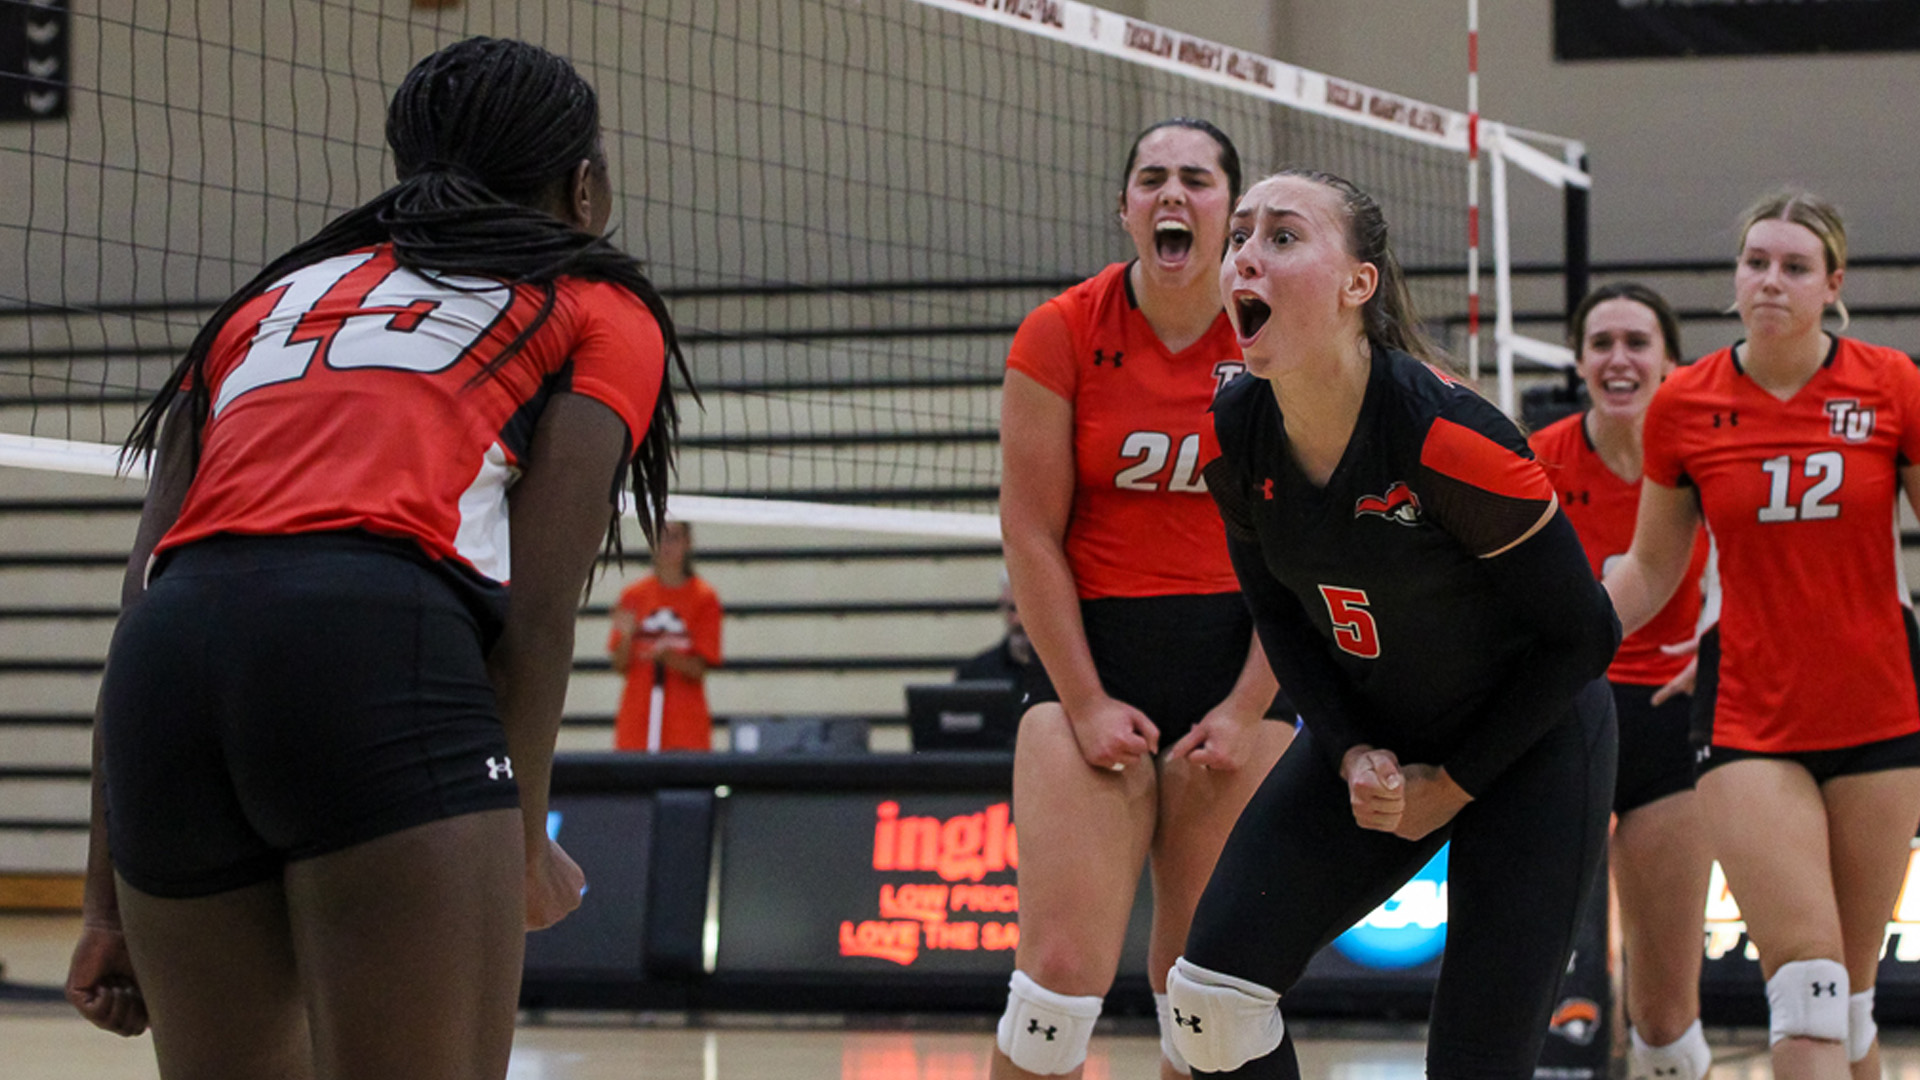 Tusculum scorches on day one at Rollins